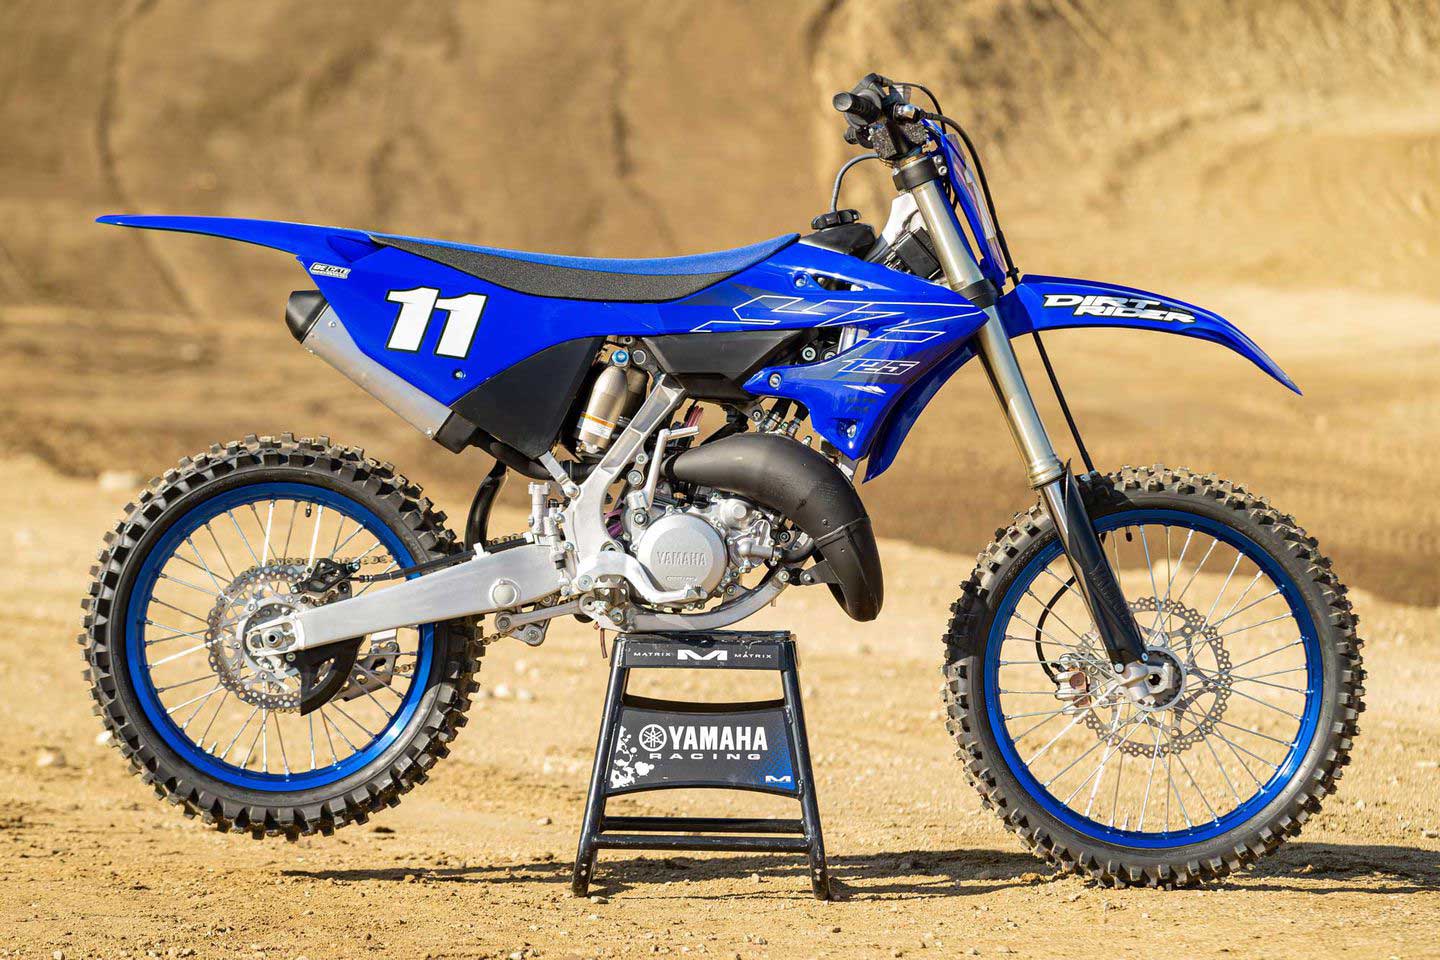 2022 Yamaha Yz125 Buyer'S Guide: Specs, Photos, Price | Cycle World